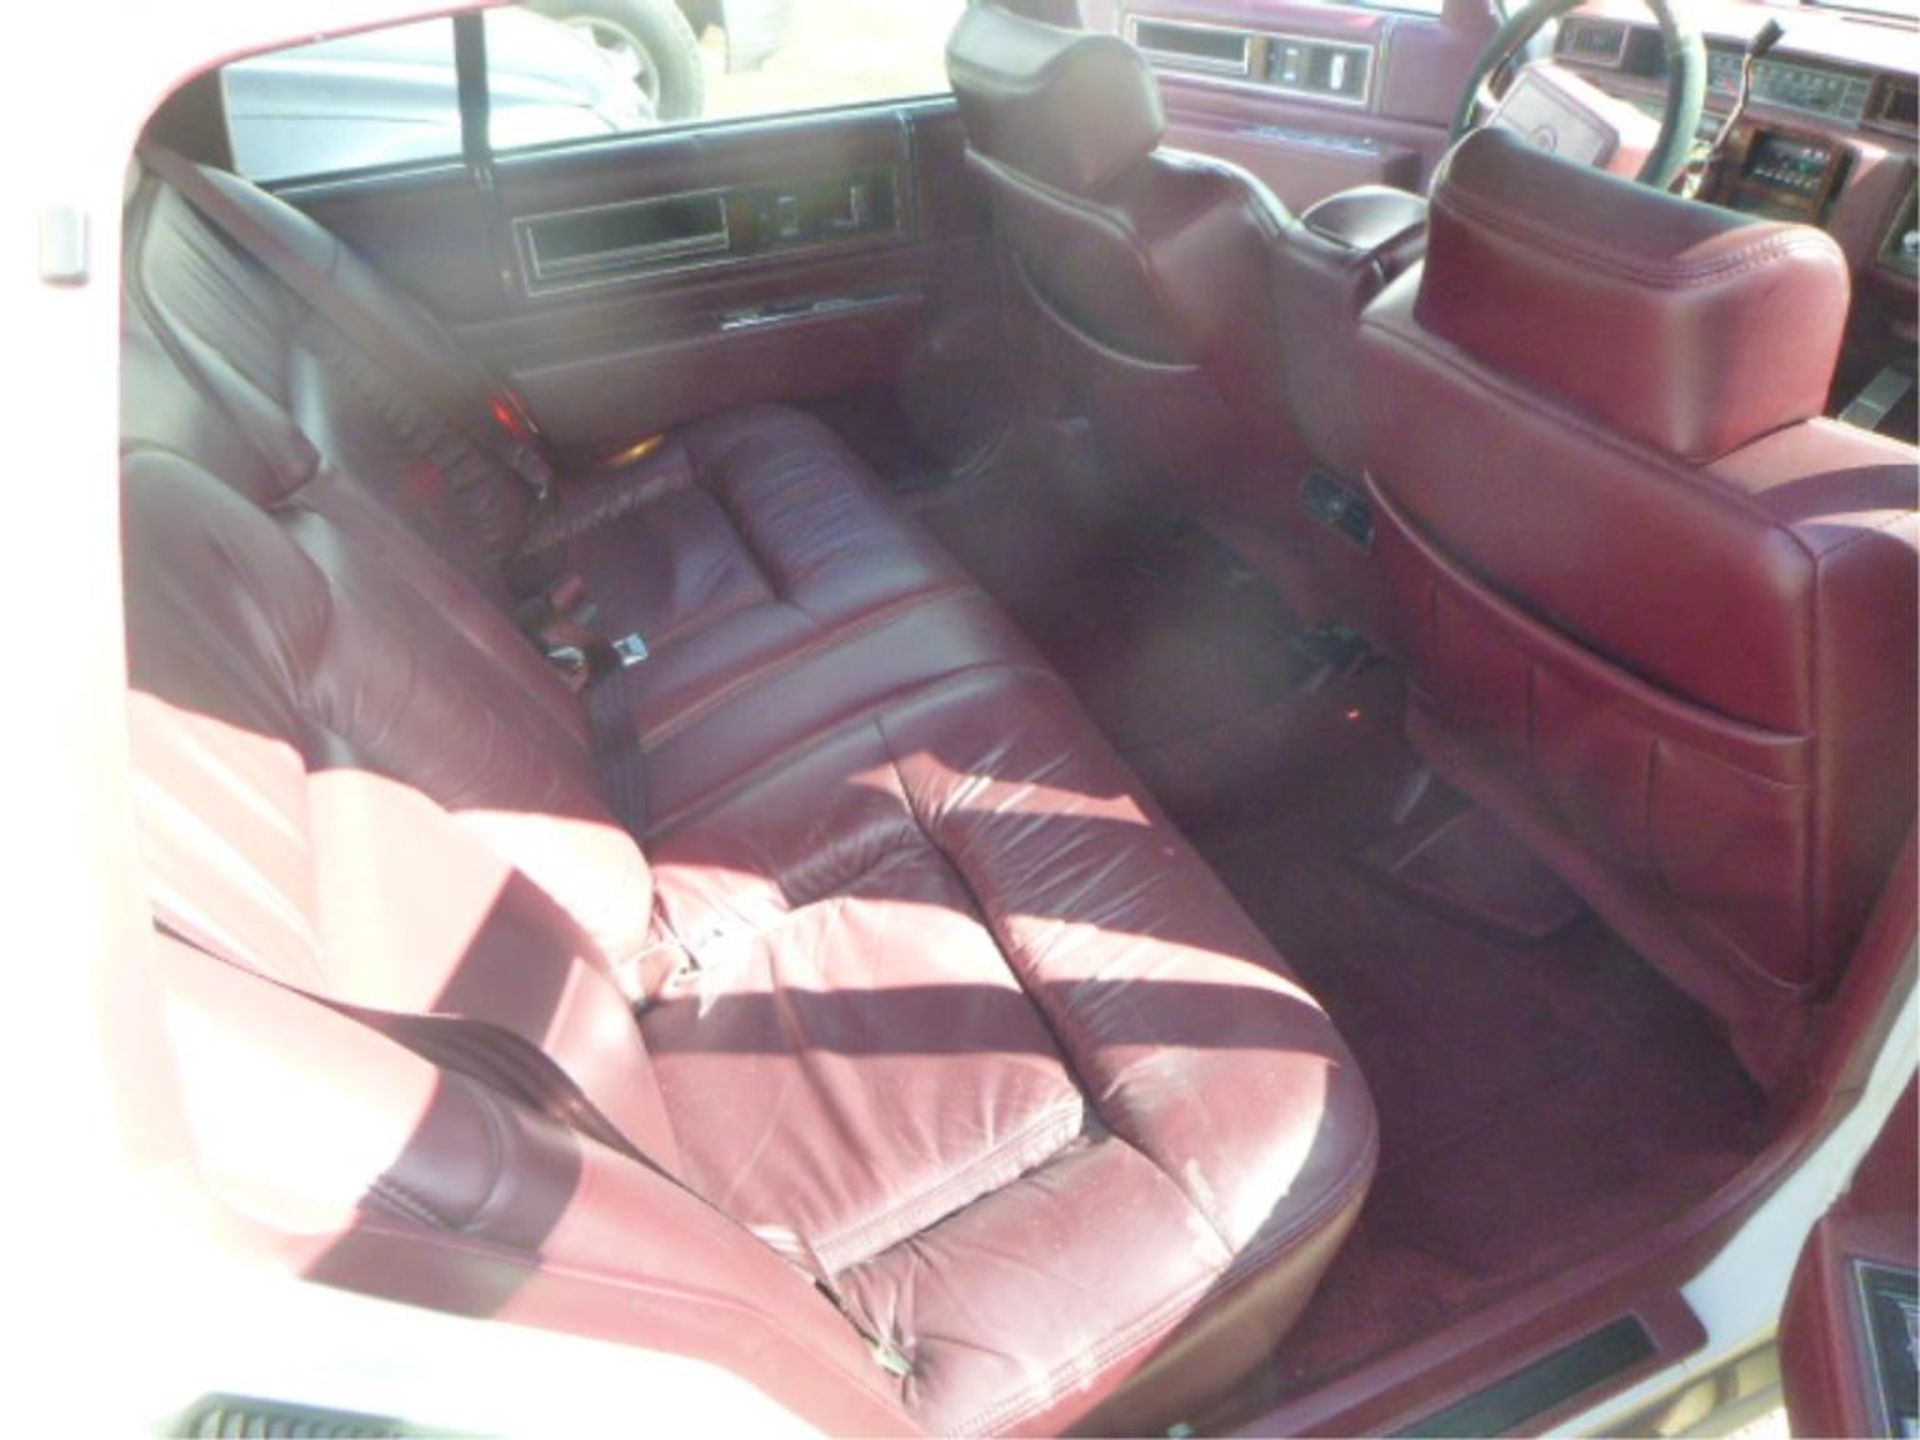 1992 Cadillac Deville - Image 9 of 14